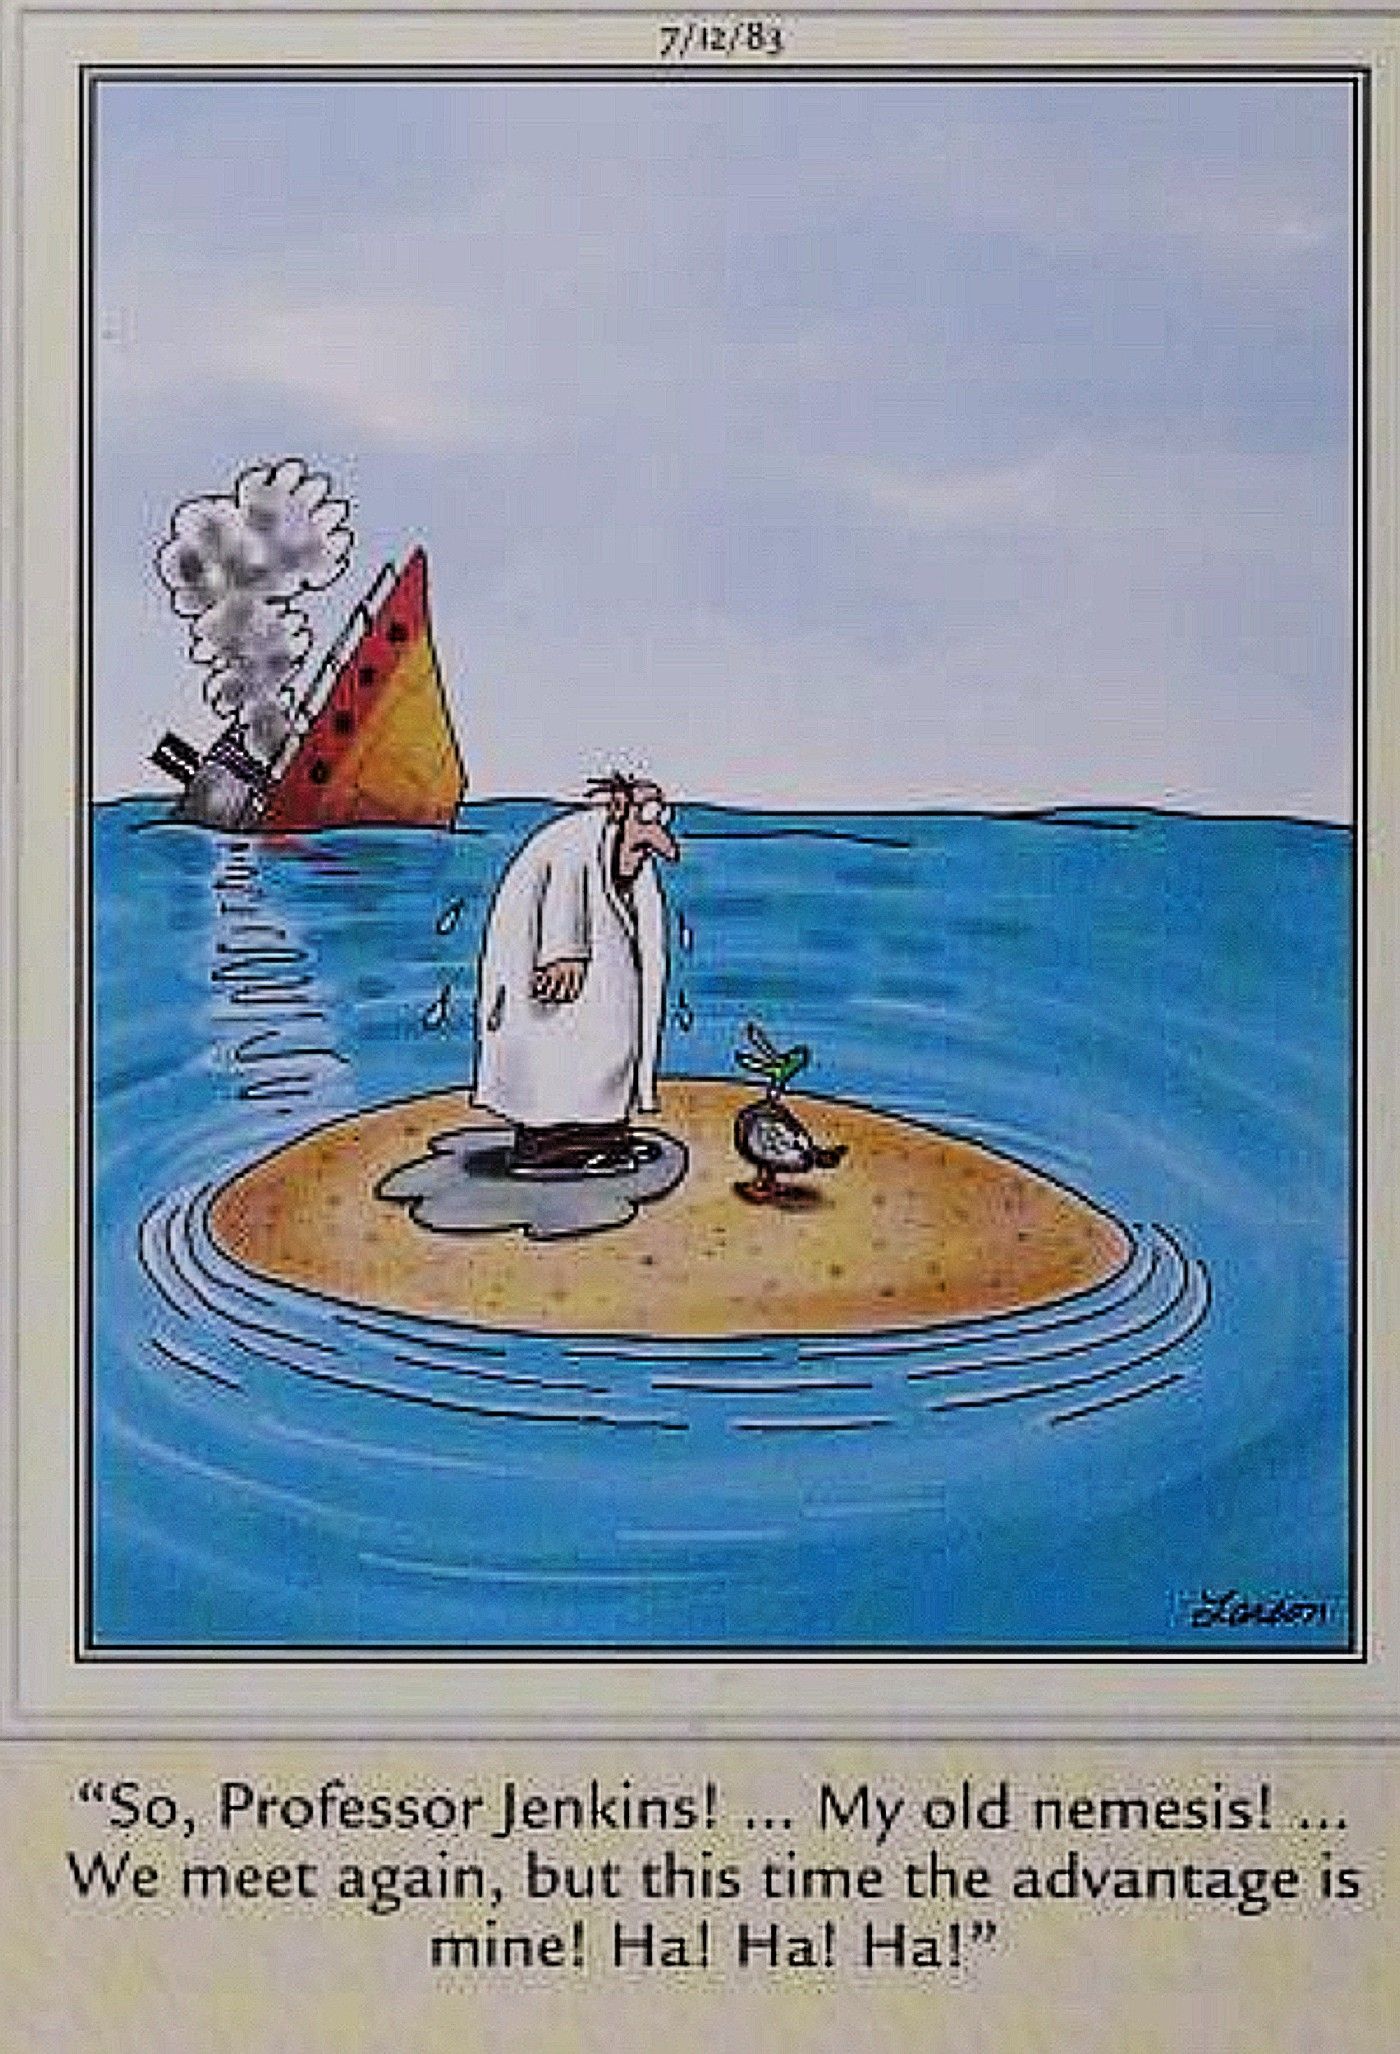 Far Side, Professor Jenkins and his nemesis, a duck, are stranded on a desert island